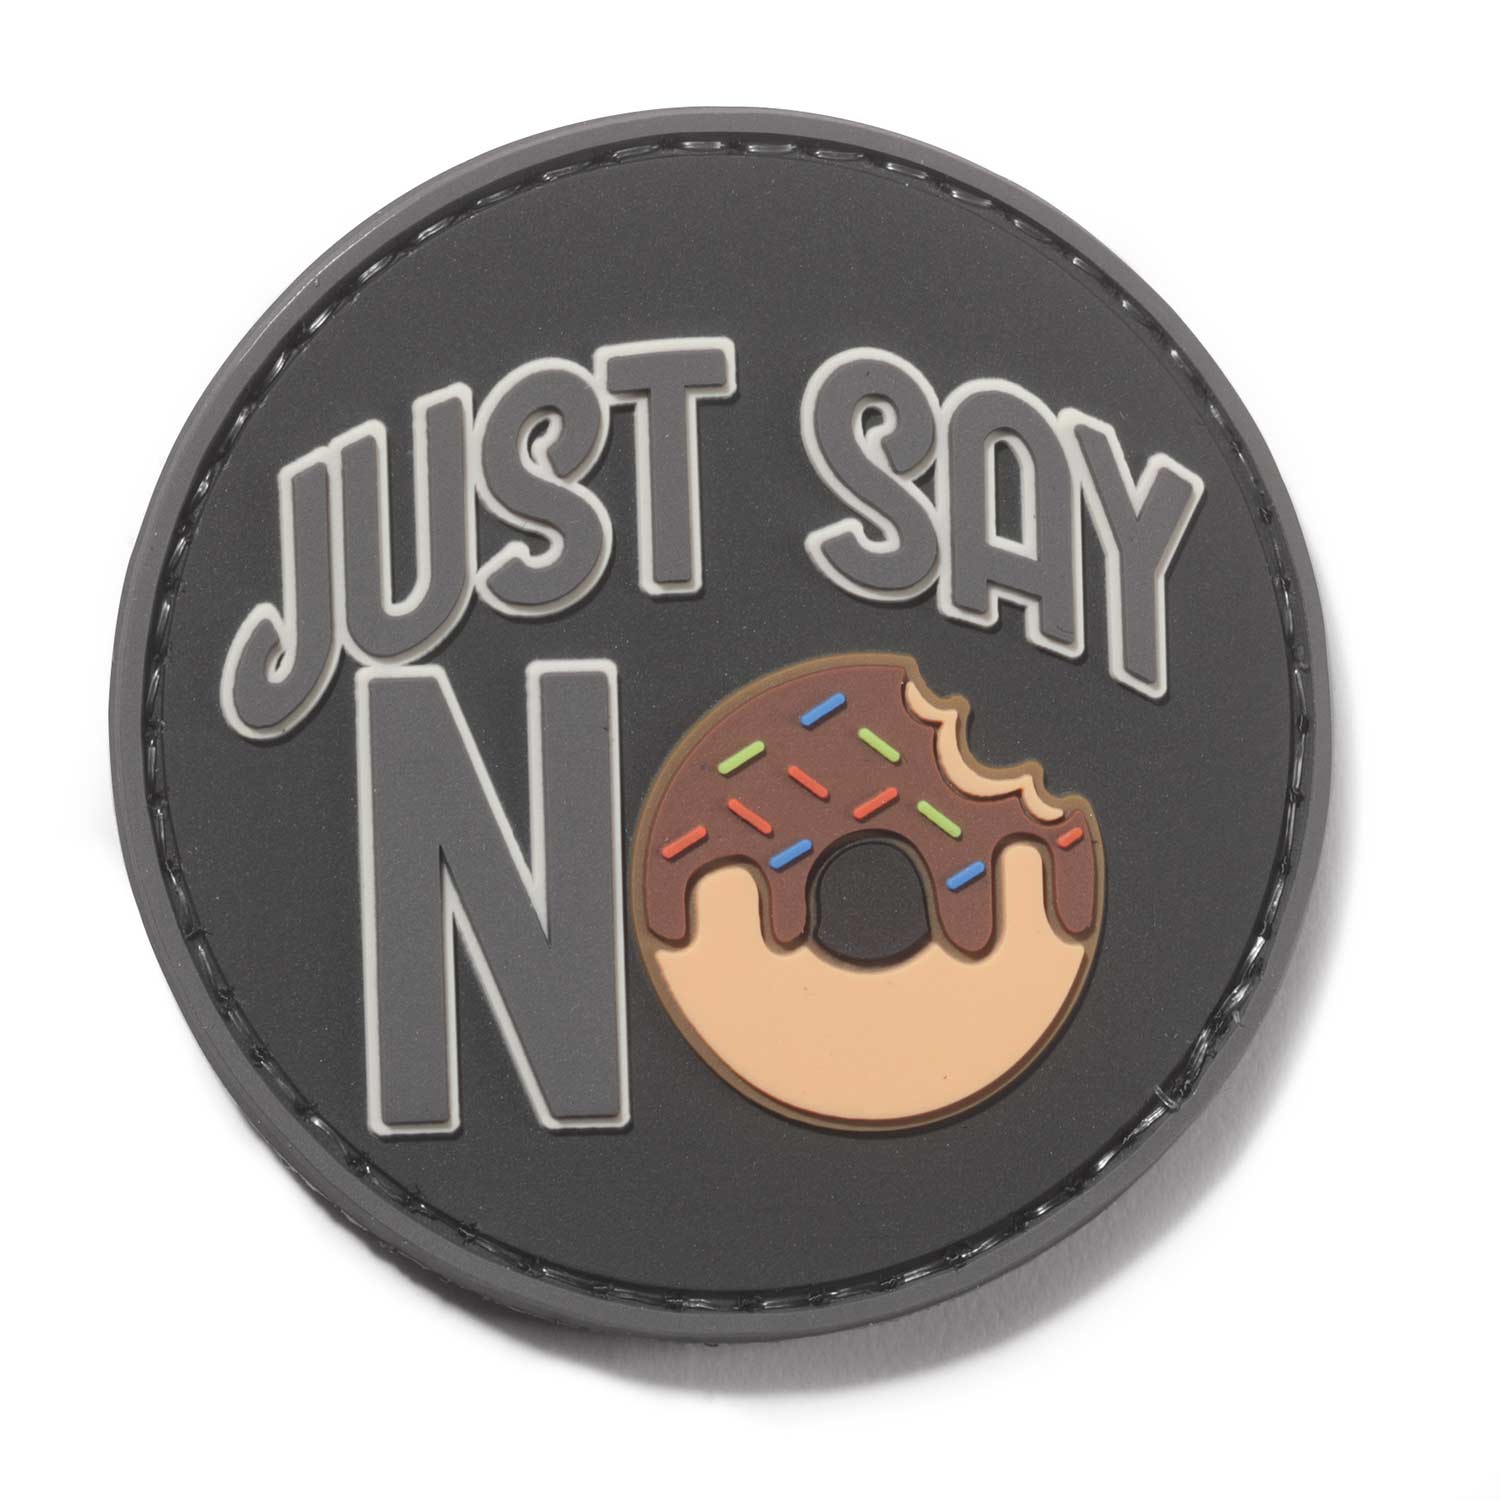 5ive Star Gear Just Say No Morale Patch